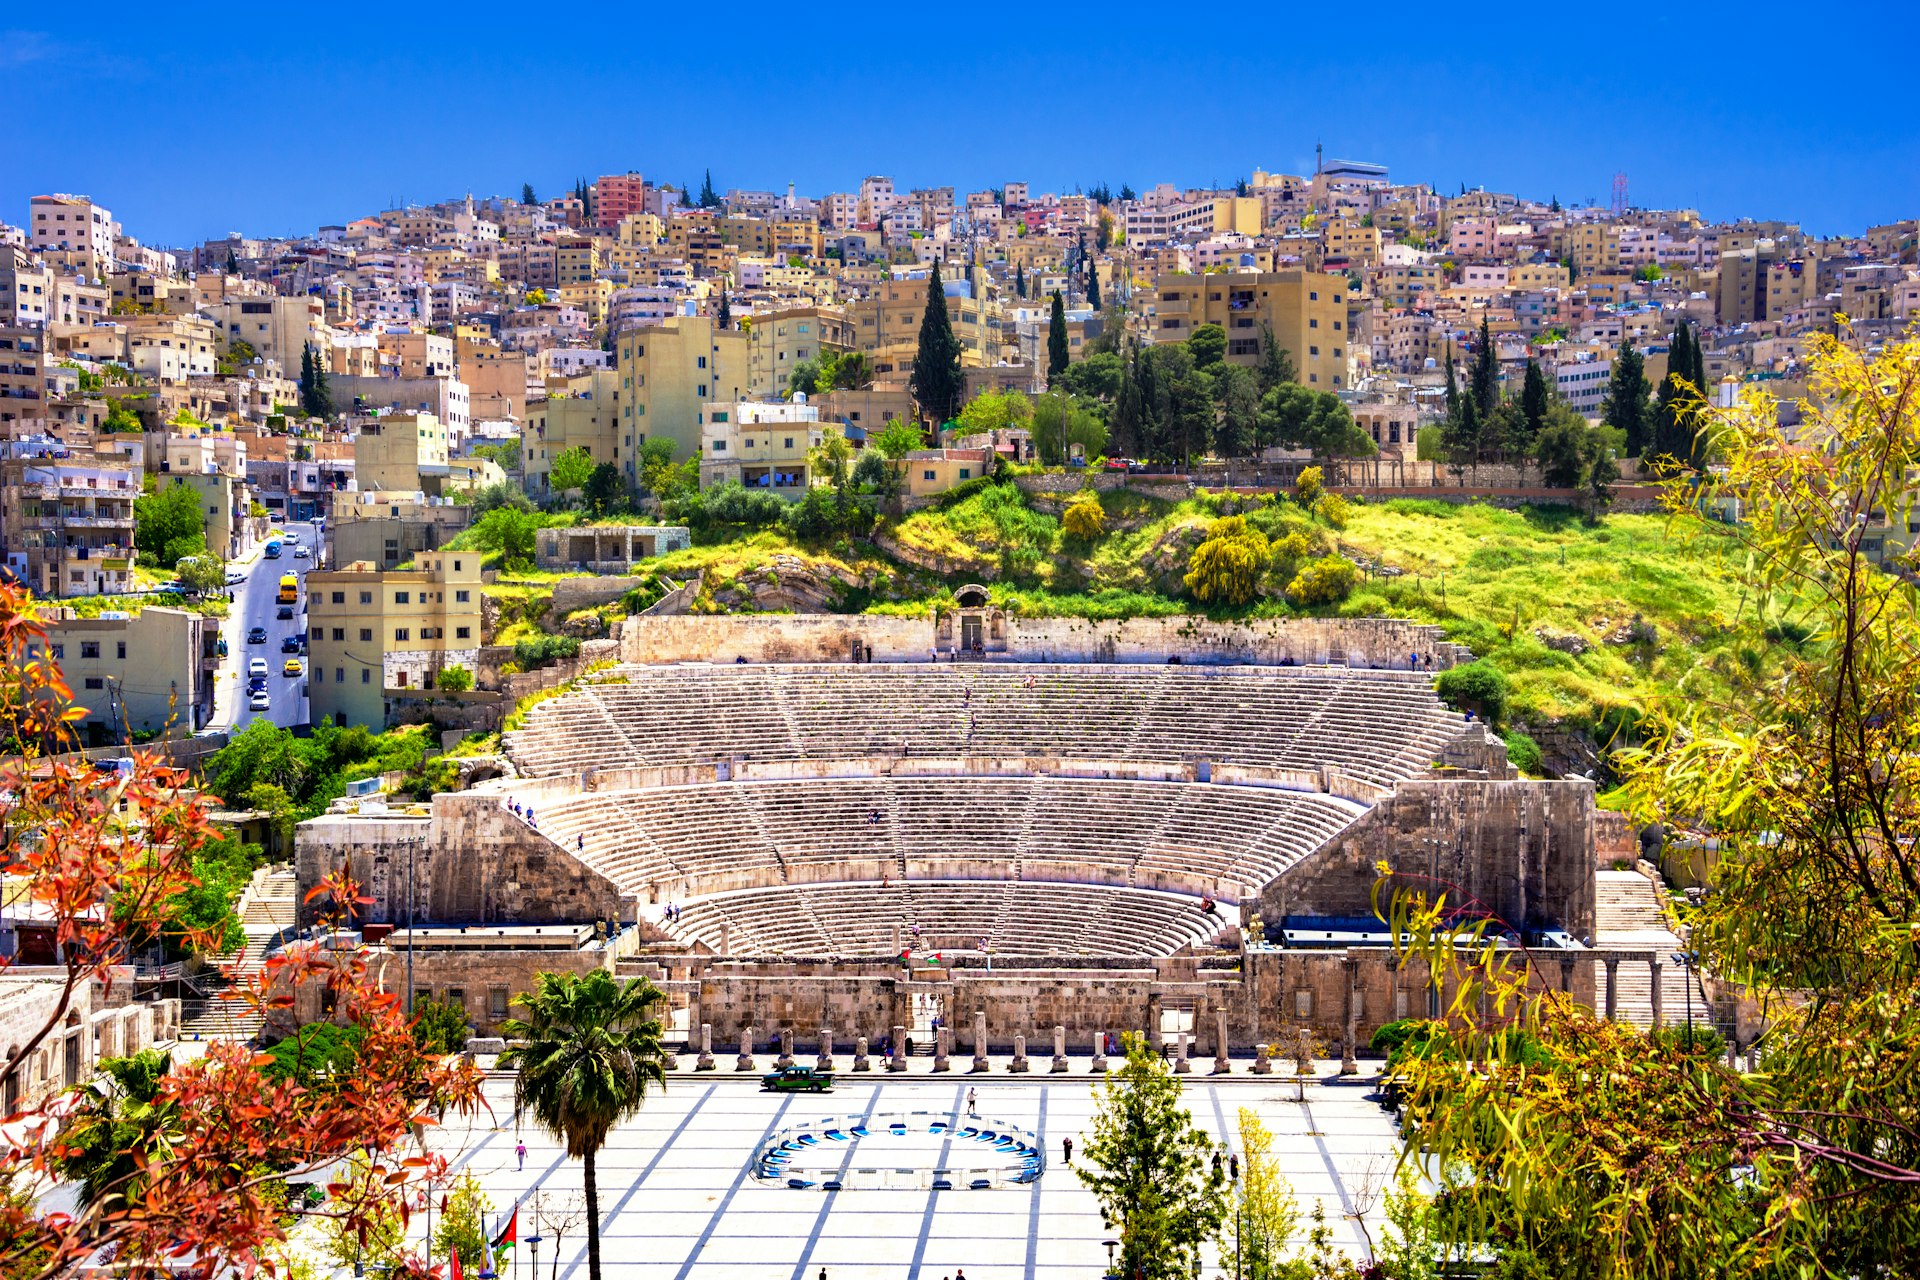 An aerial view of the Roman amphitheater carved into the hillside of Amman, Jordan